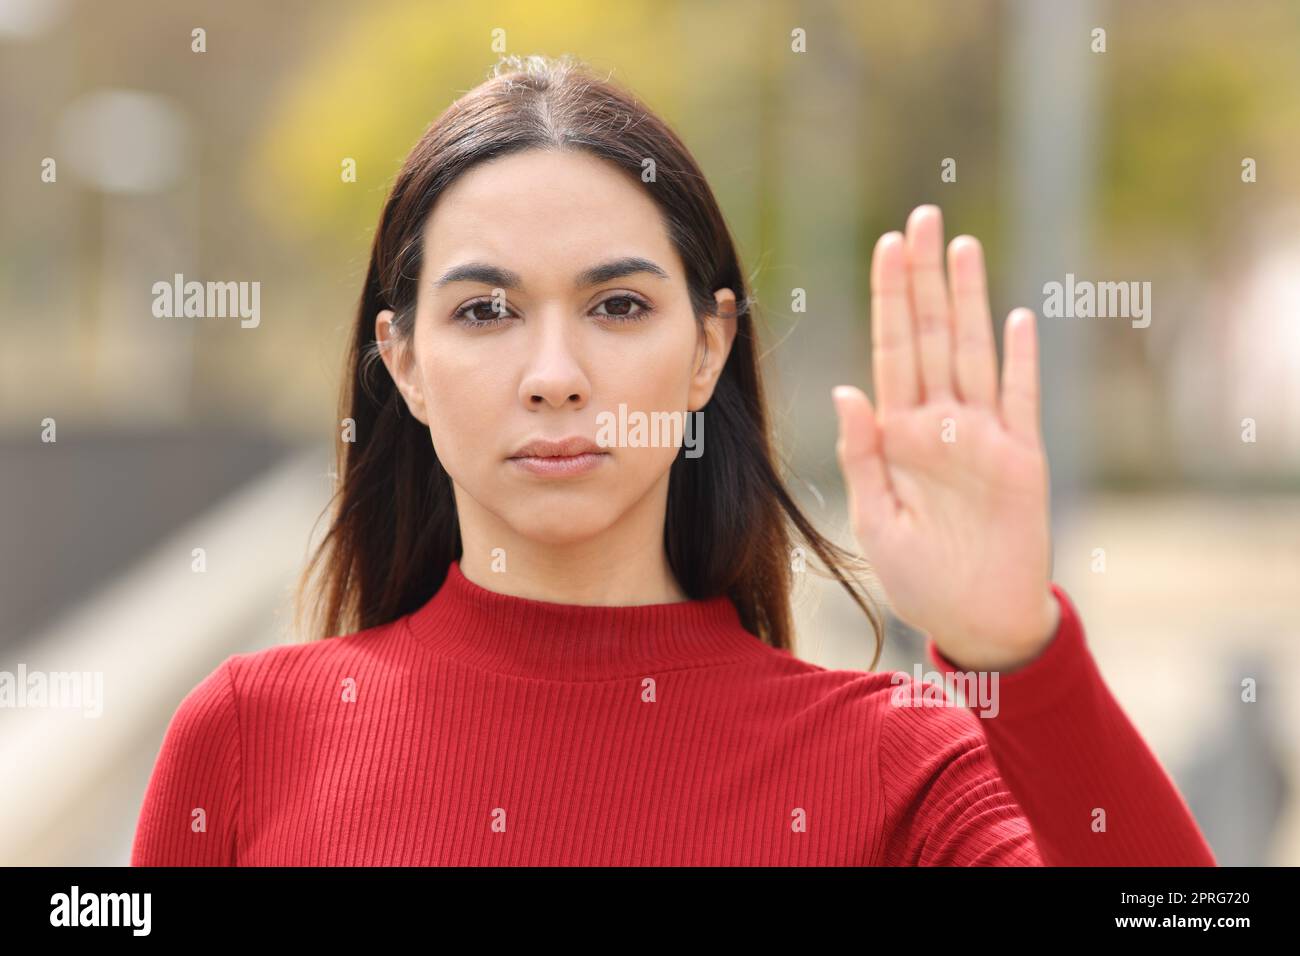 Serious woman in red gesturing stop with hand Stock Photo